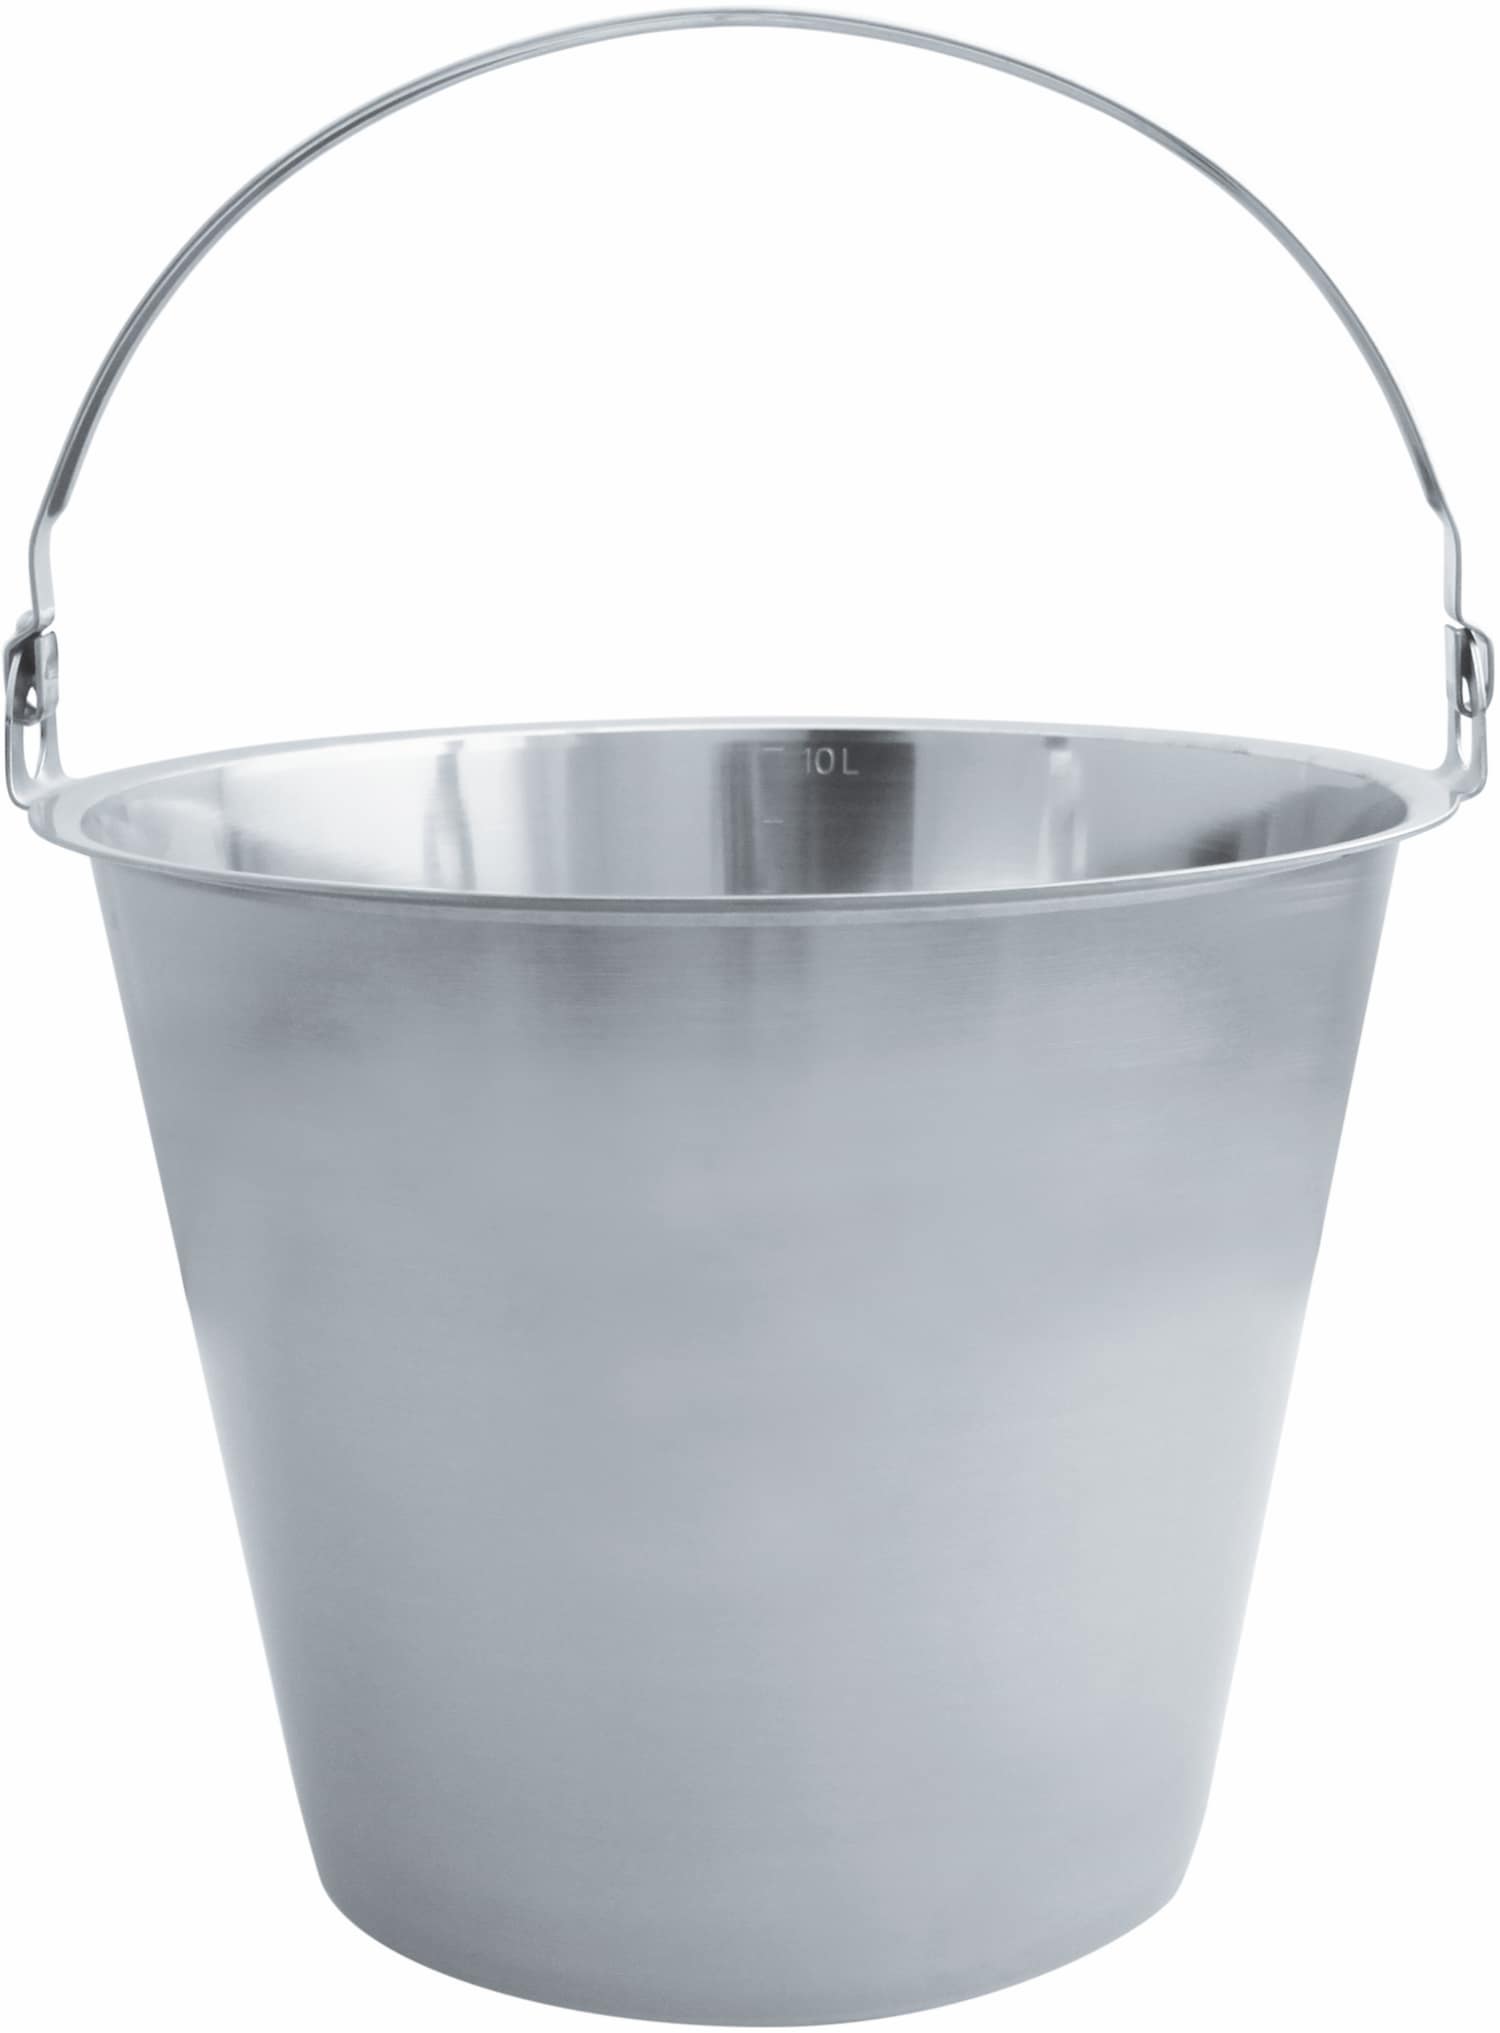 Bucket with flat bottom and inside scale